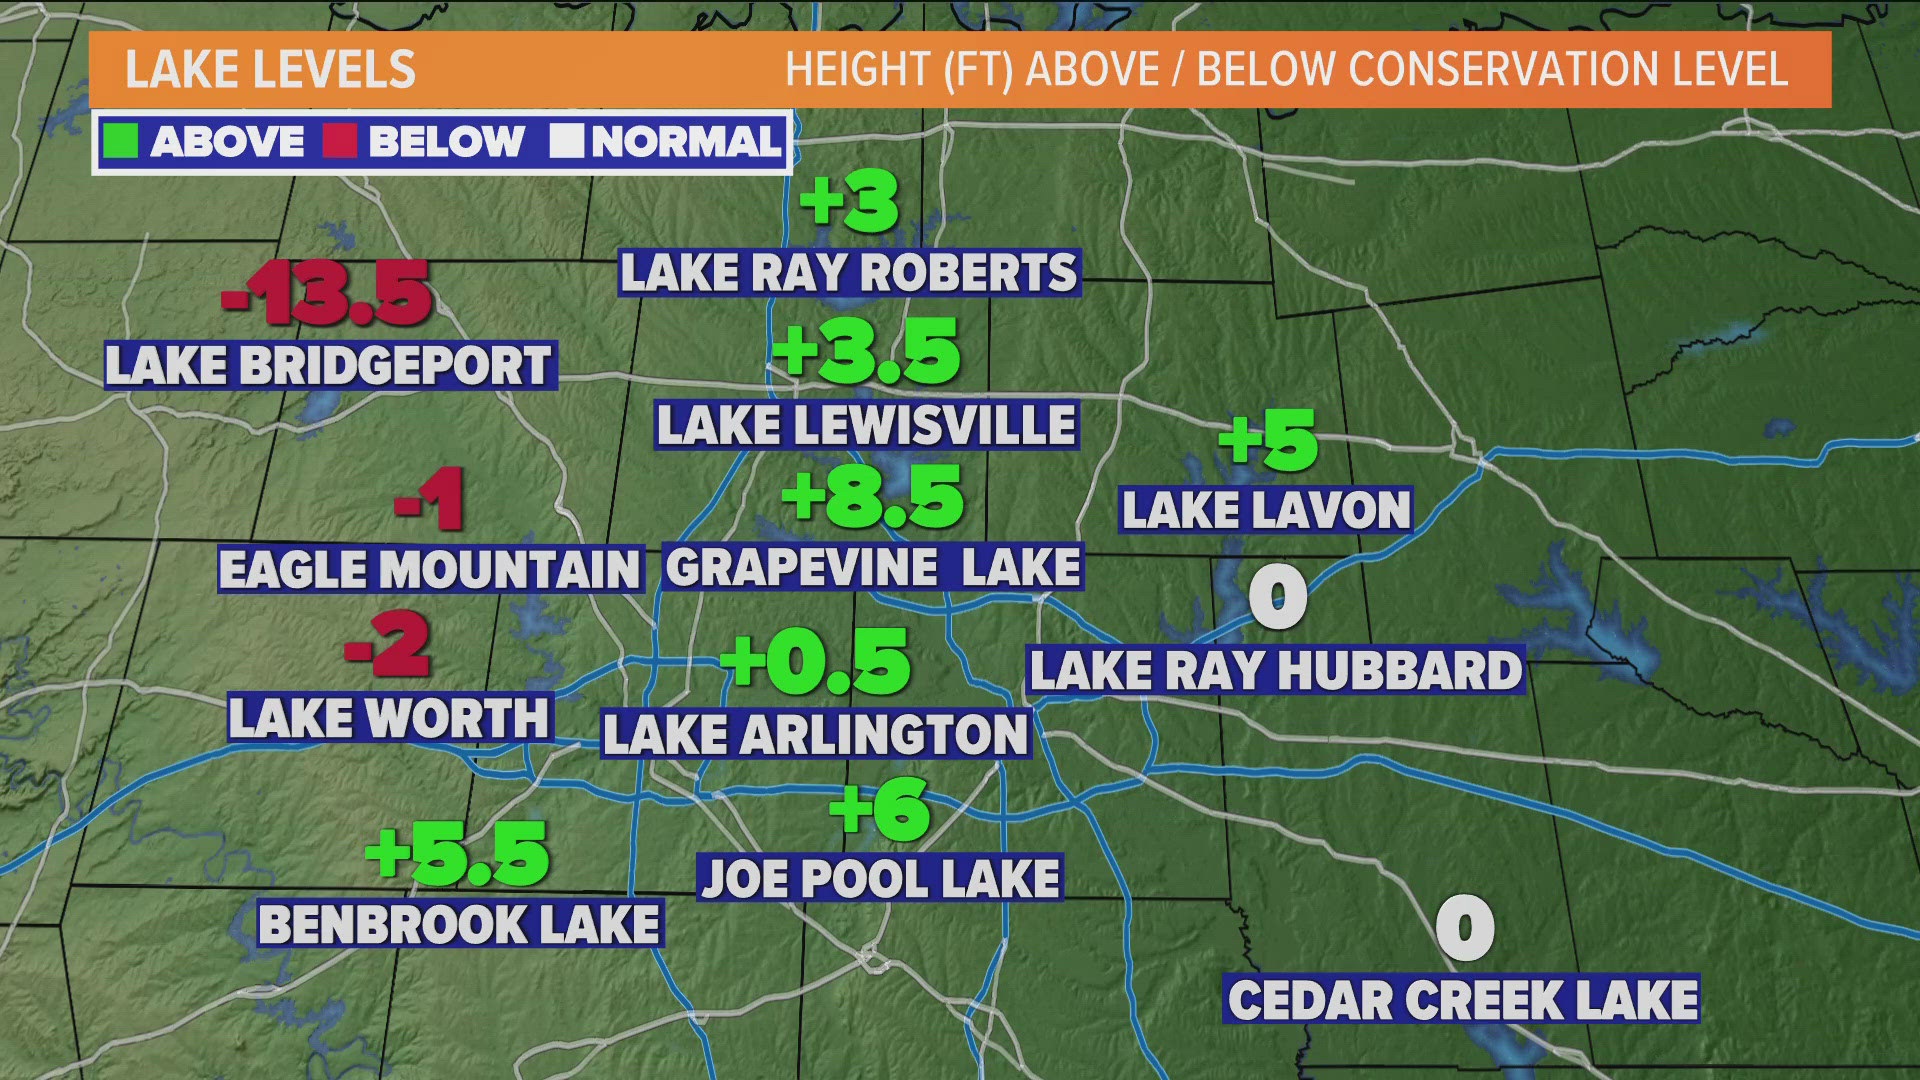 Several lakes in North Texas has elevated water levels.